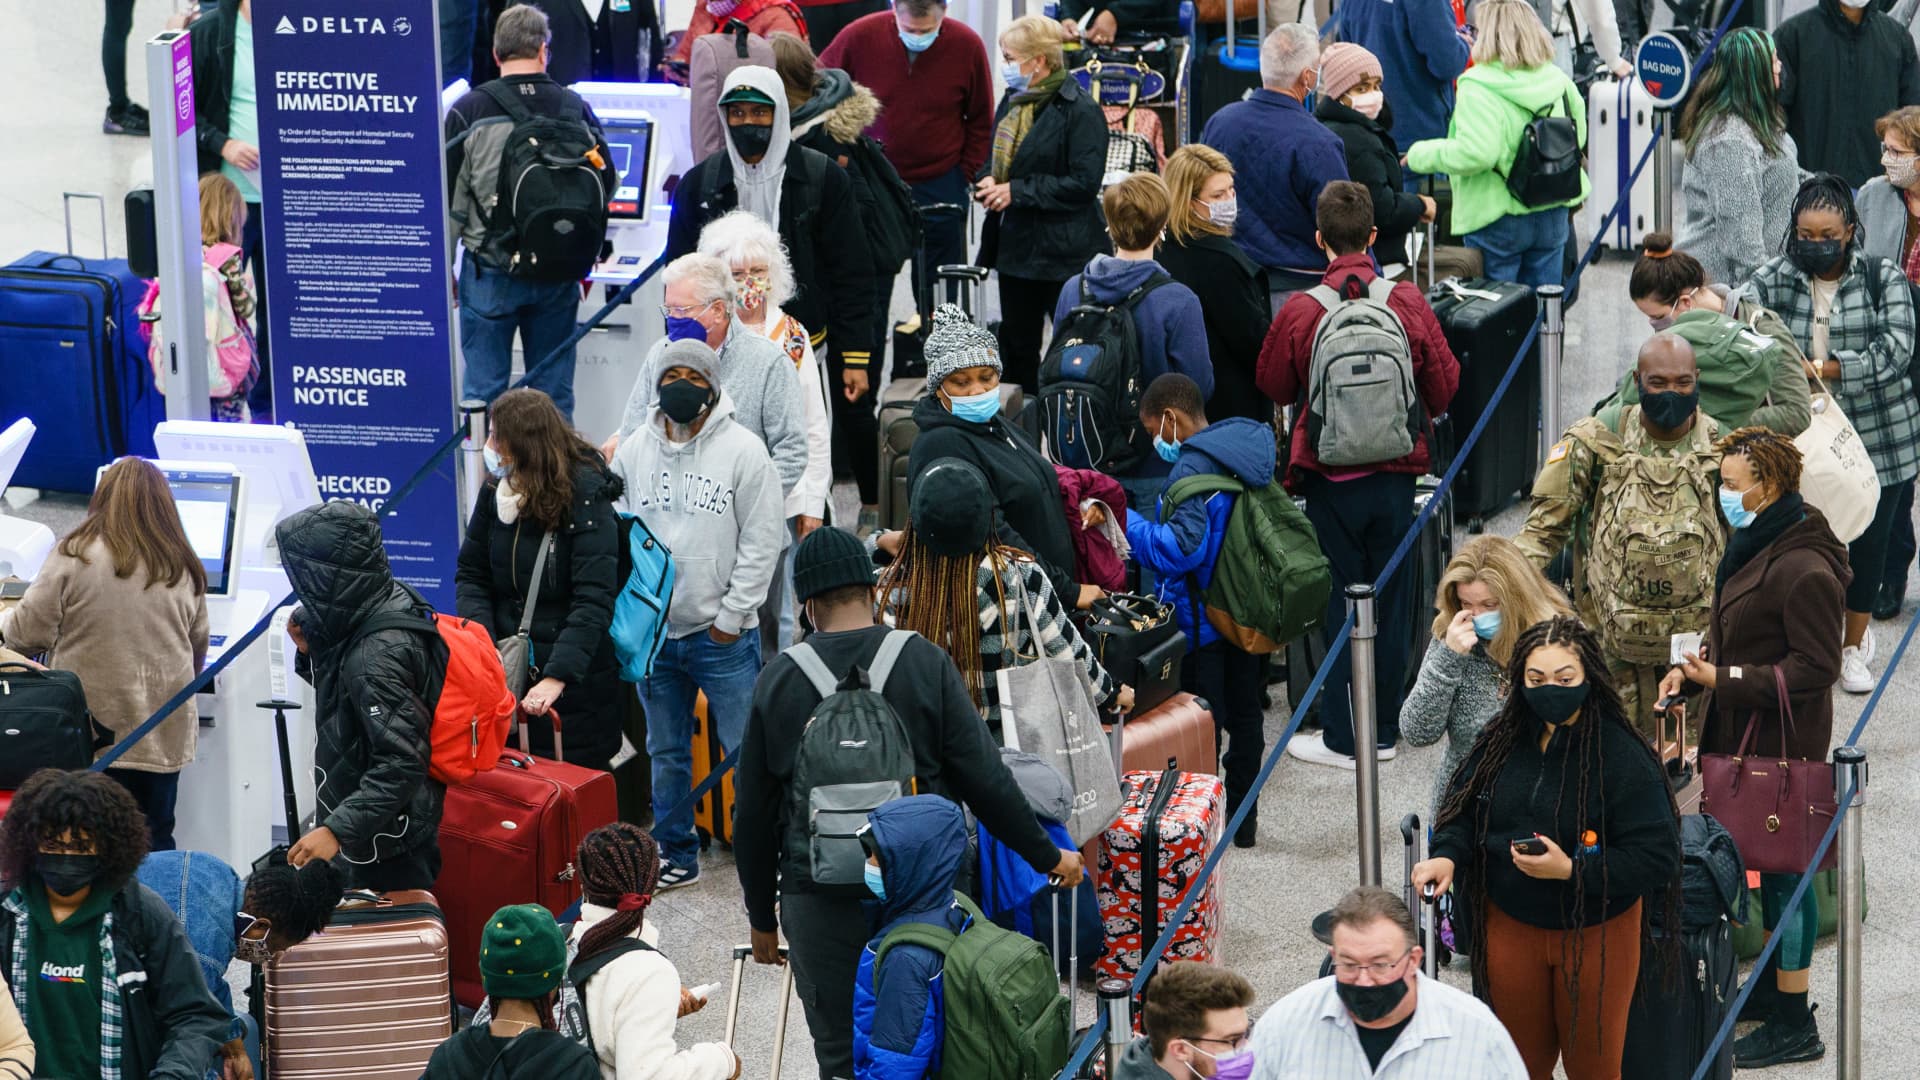 Airfare surged 20% over pre-pandemic levels in March as inflation hit vacations – CNBC